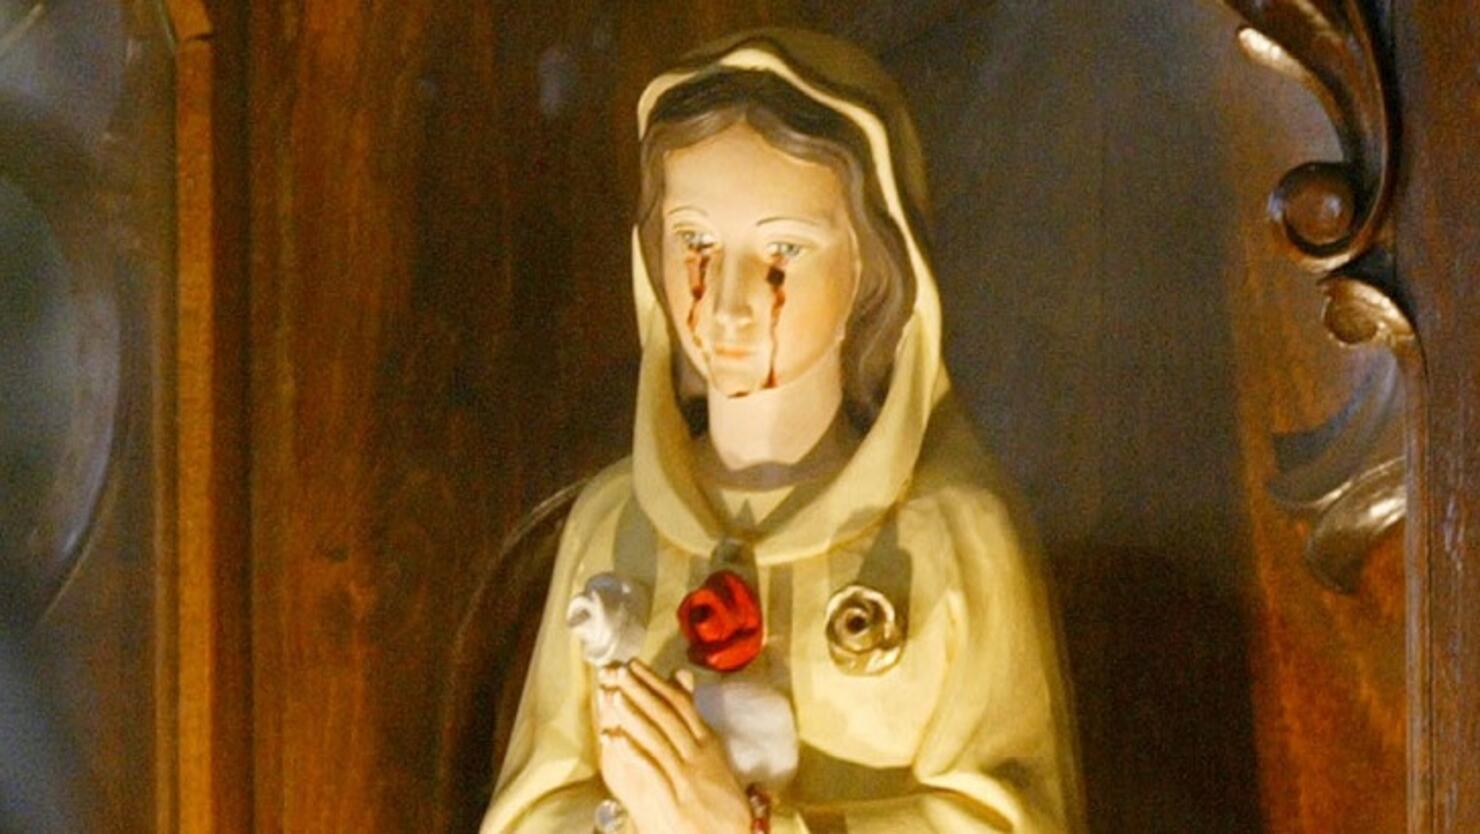 Video: 'Crying' Virgin Mary Statue Causes Stir in Mexican Town | iHeart